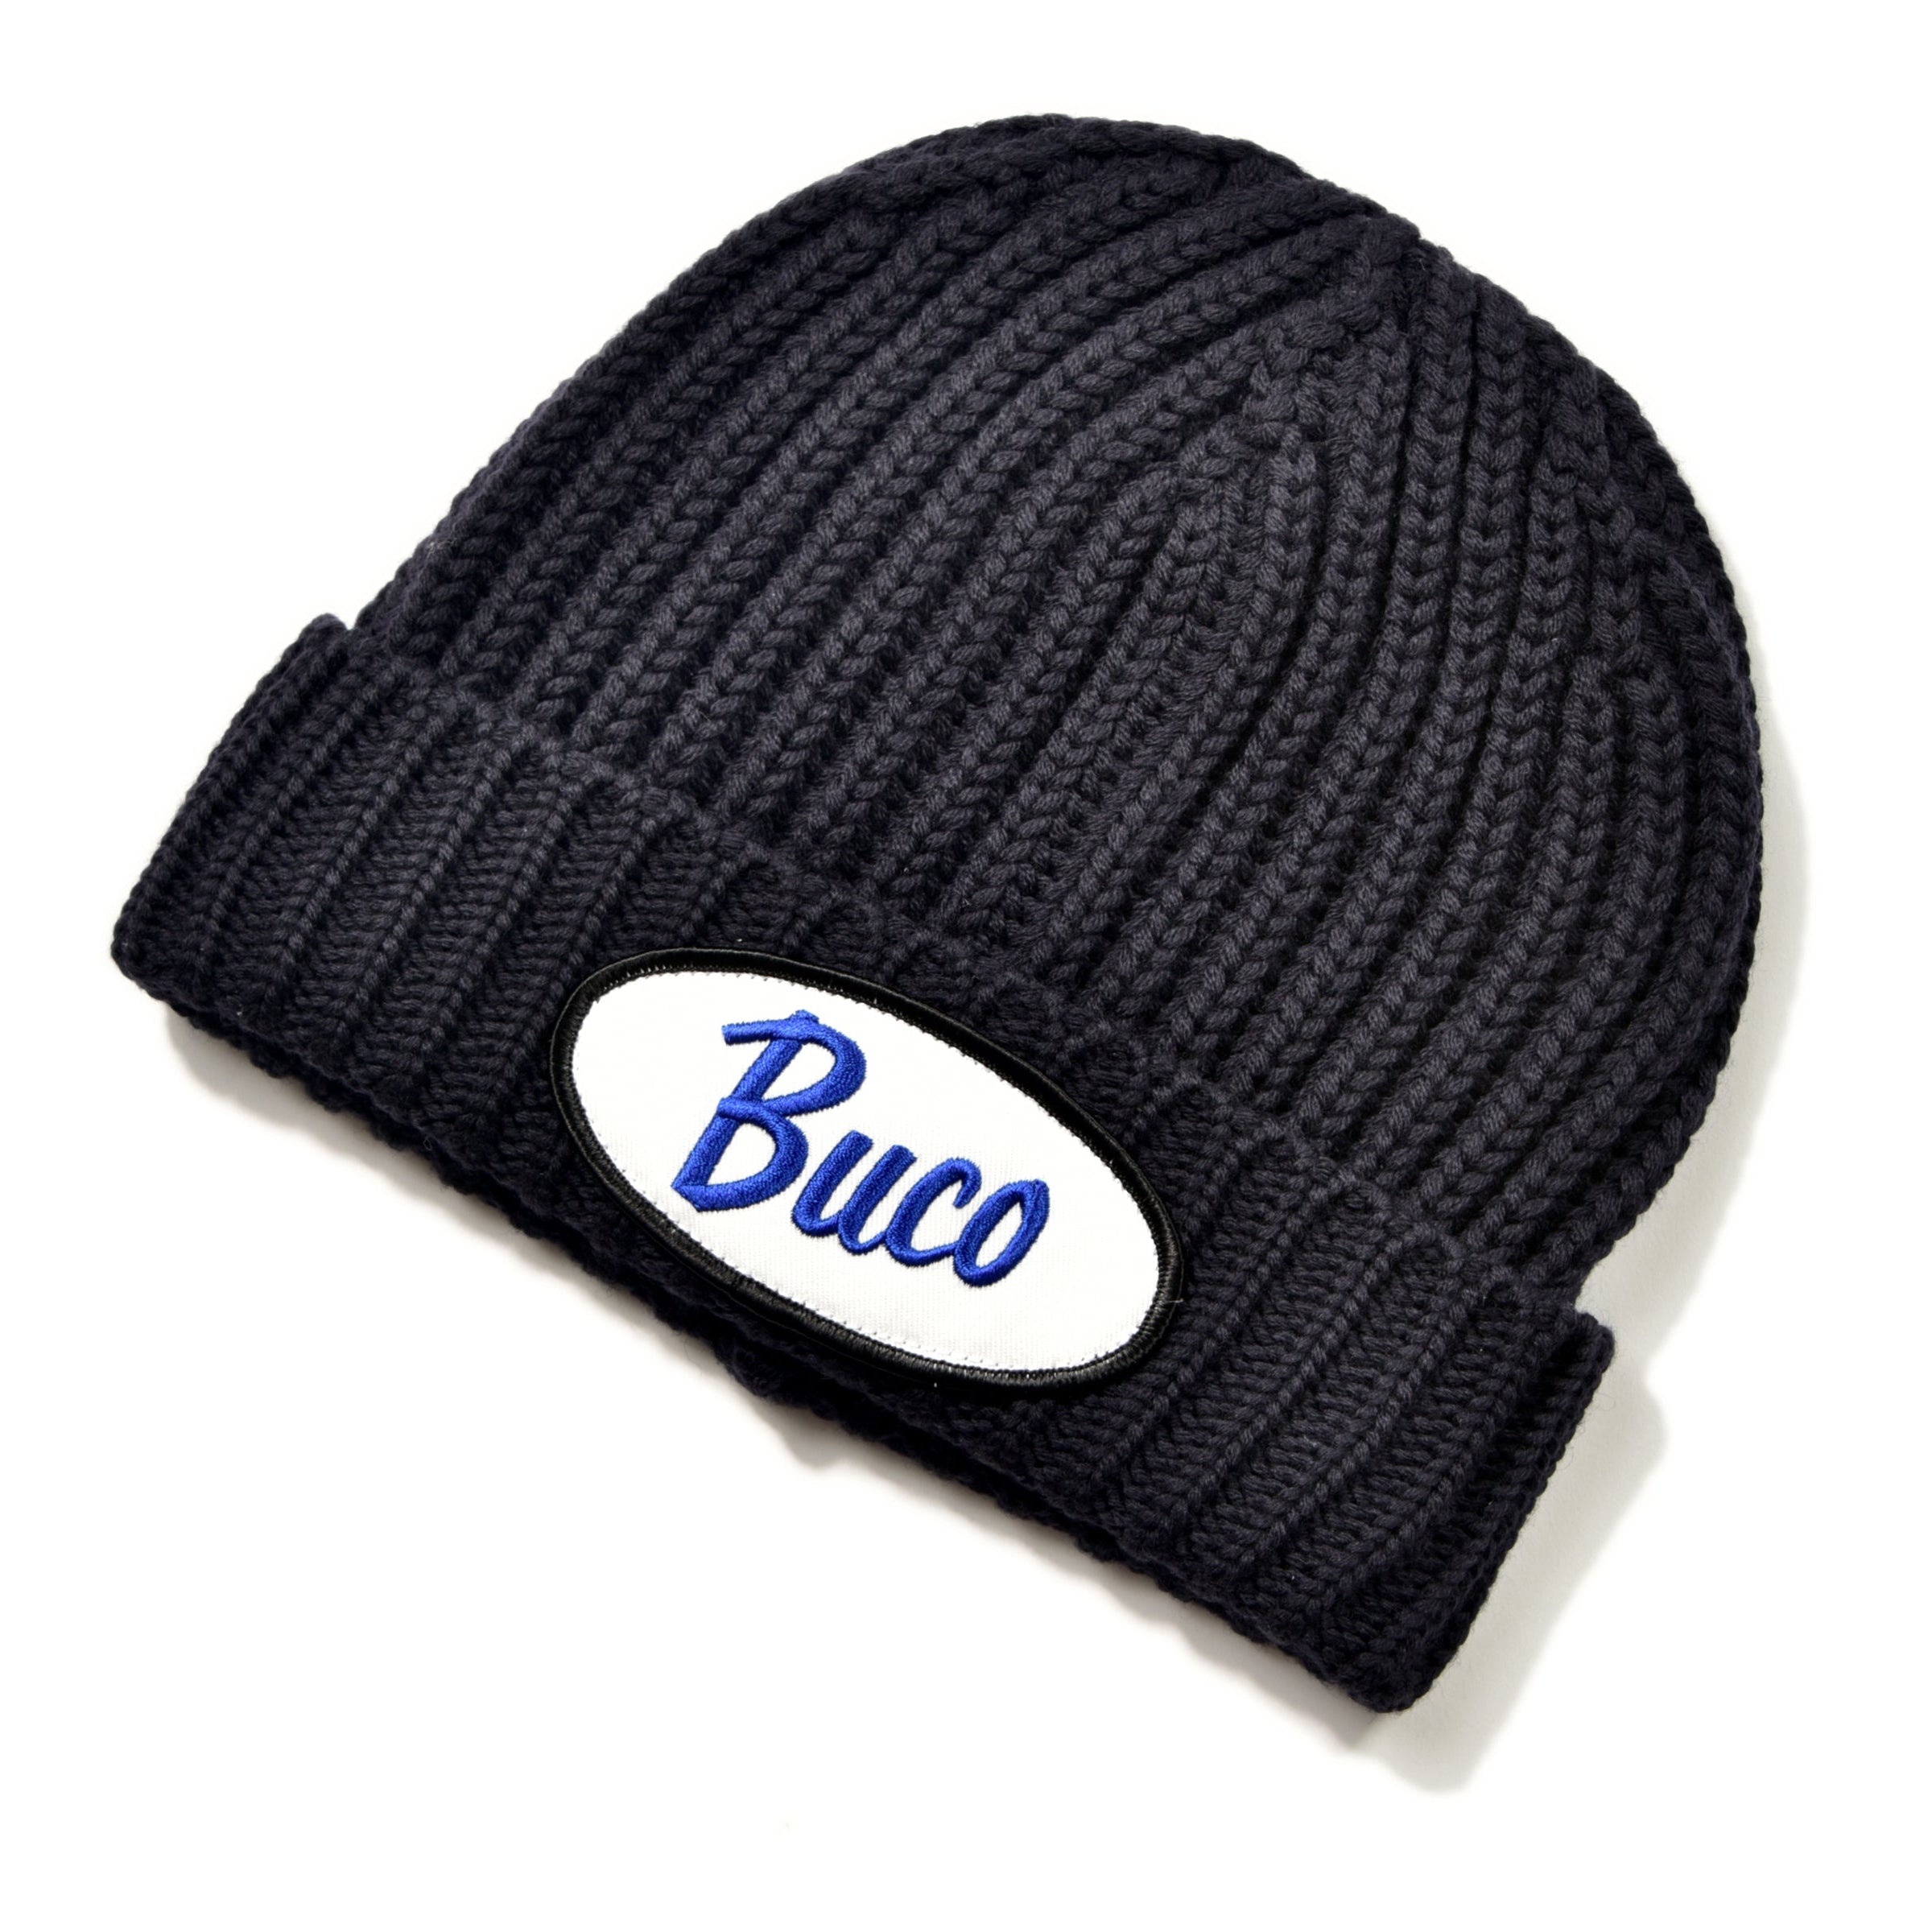 THE REAL McCOY'S BUCO LOGO KNIT CAP イエロー - ニットキャップ